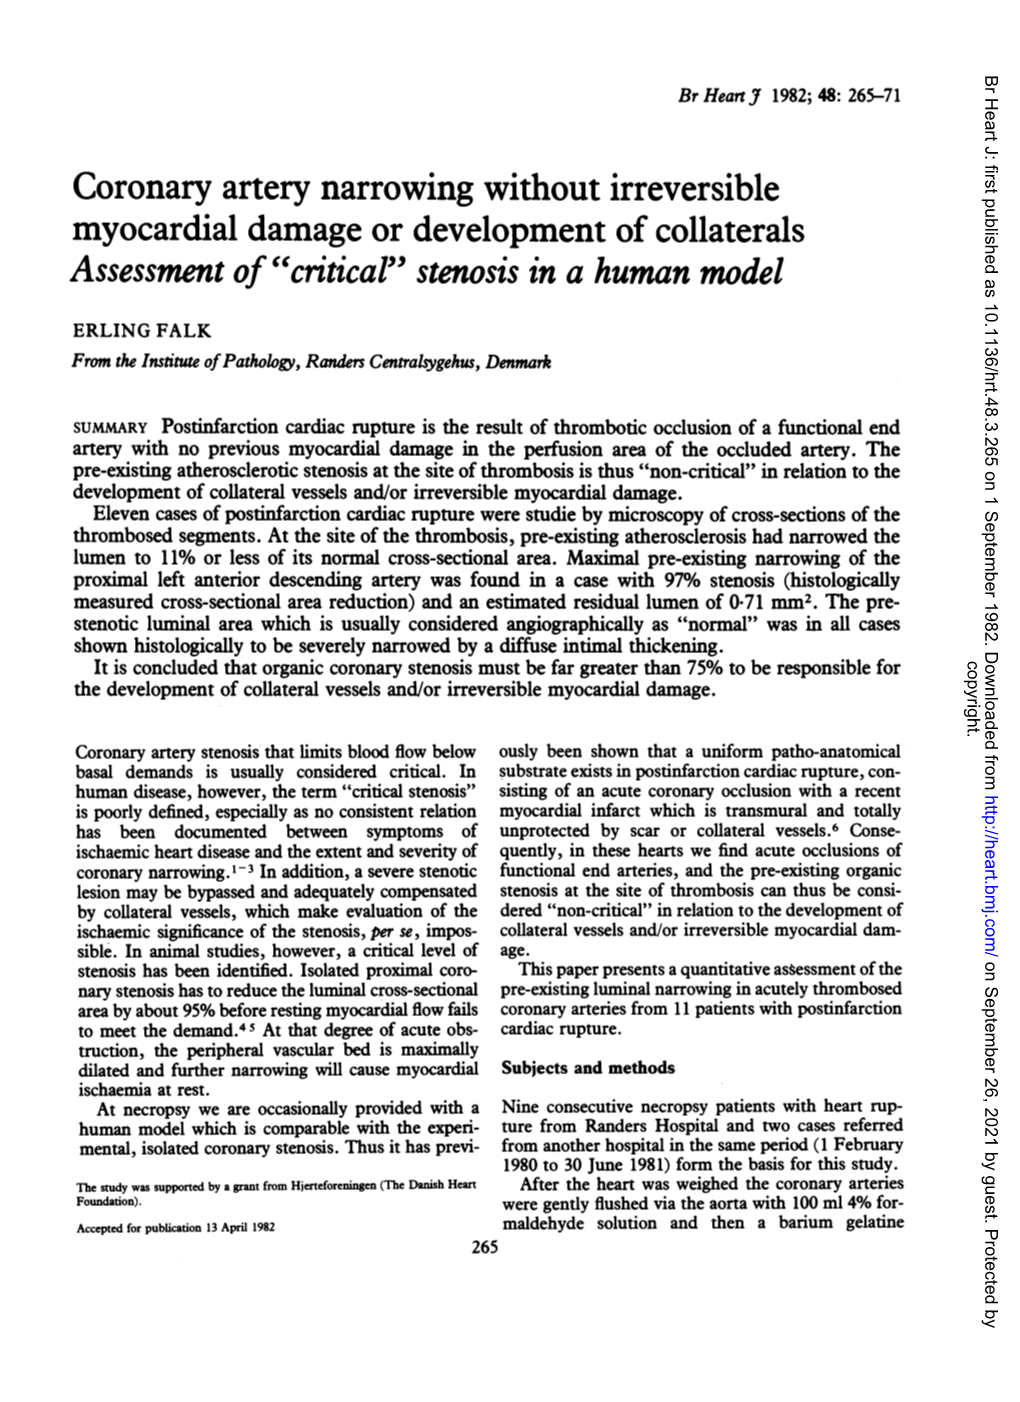 Coronary Artery Narrowing Without Irreversible Myocardial Damage Or Development of Collaterals Assessment of "Critical" Stenosis in a Human Model